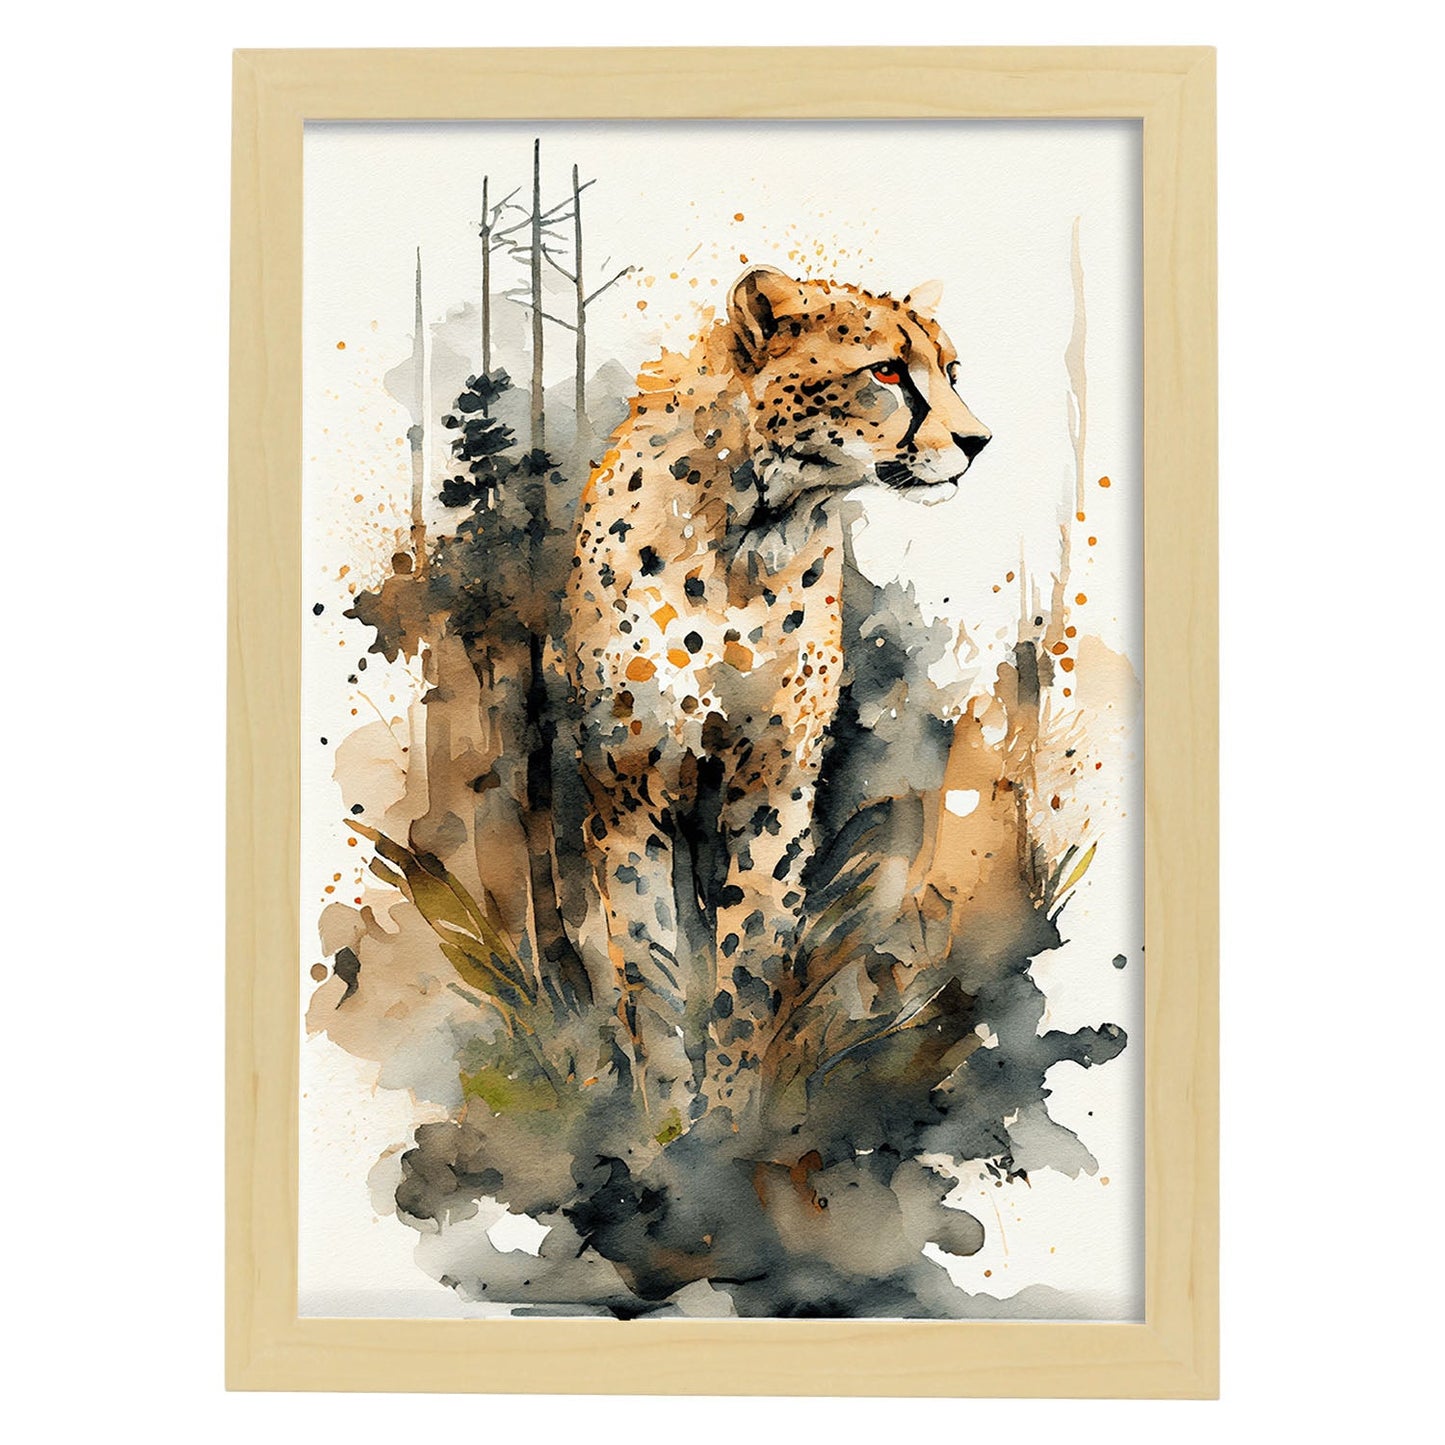 Nacnic Watercolor of Cheetah in the forest_2. Aesthetic Wall Art Prints for Bedroom or Living Room Design.